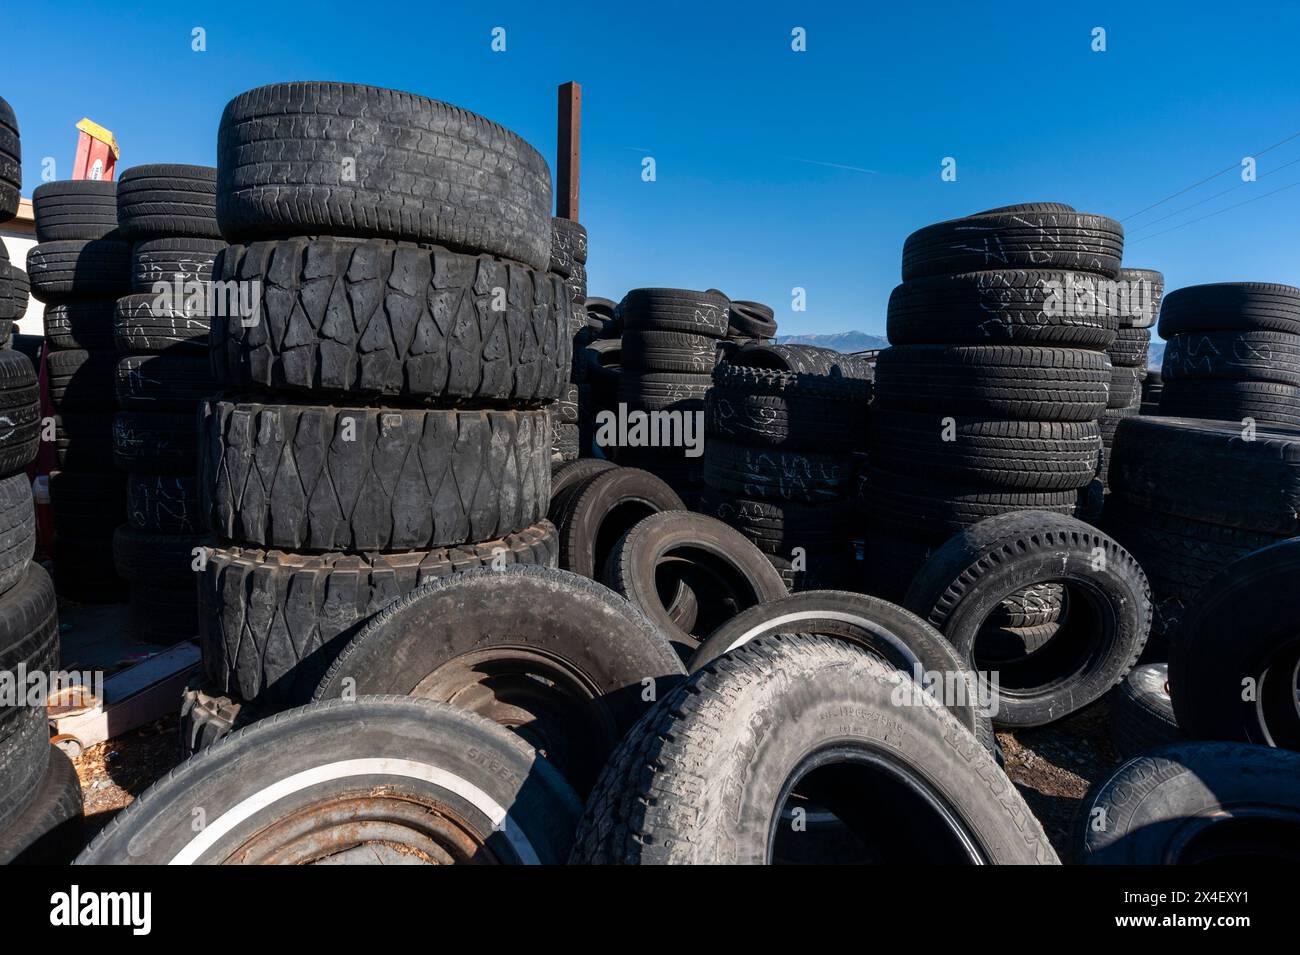 Stacks and piles of old tires designated for recycling. Pahrump, Nevada. Stock Photo